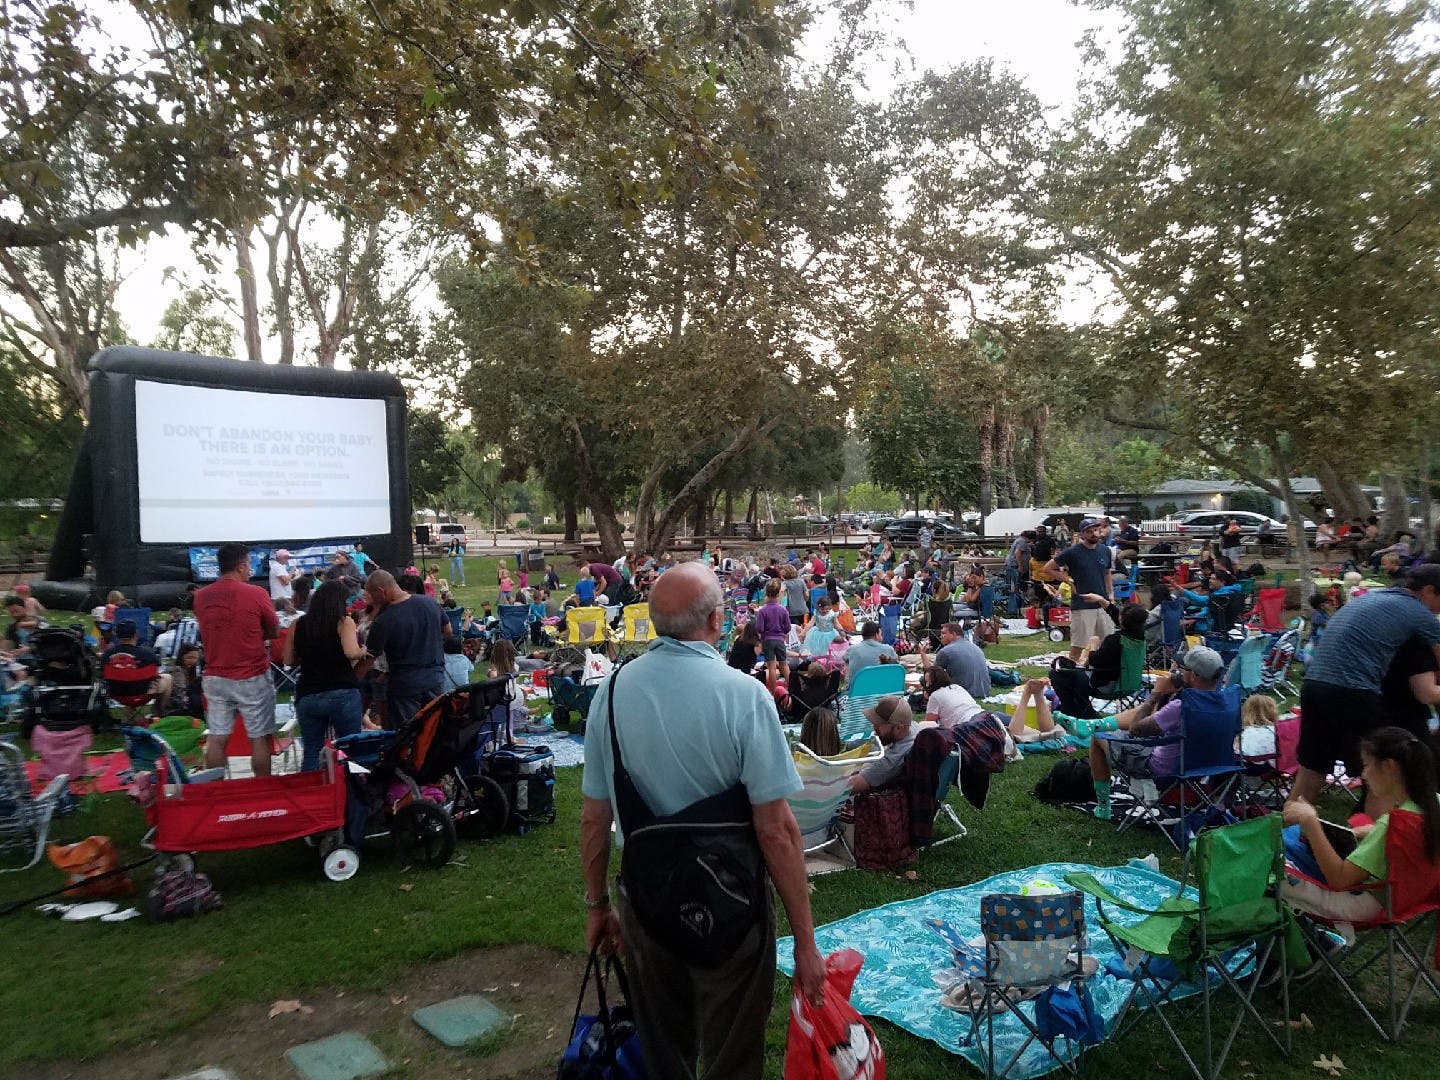 Summer Movies in the Park: Hook